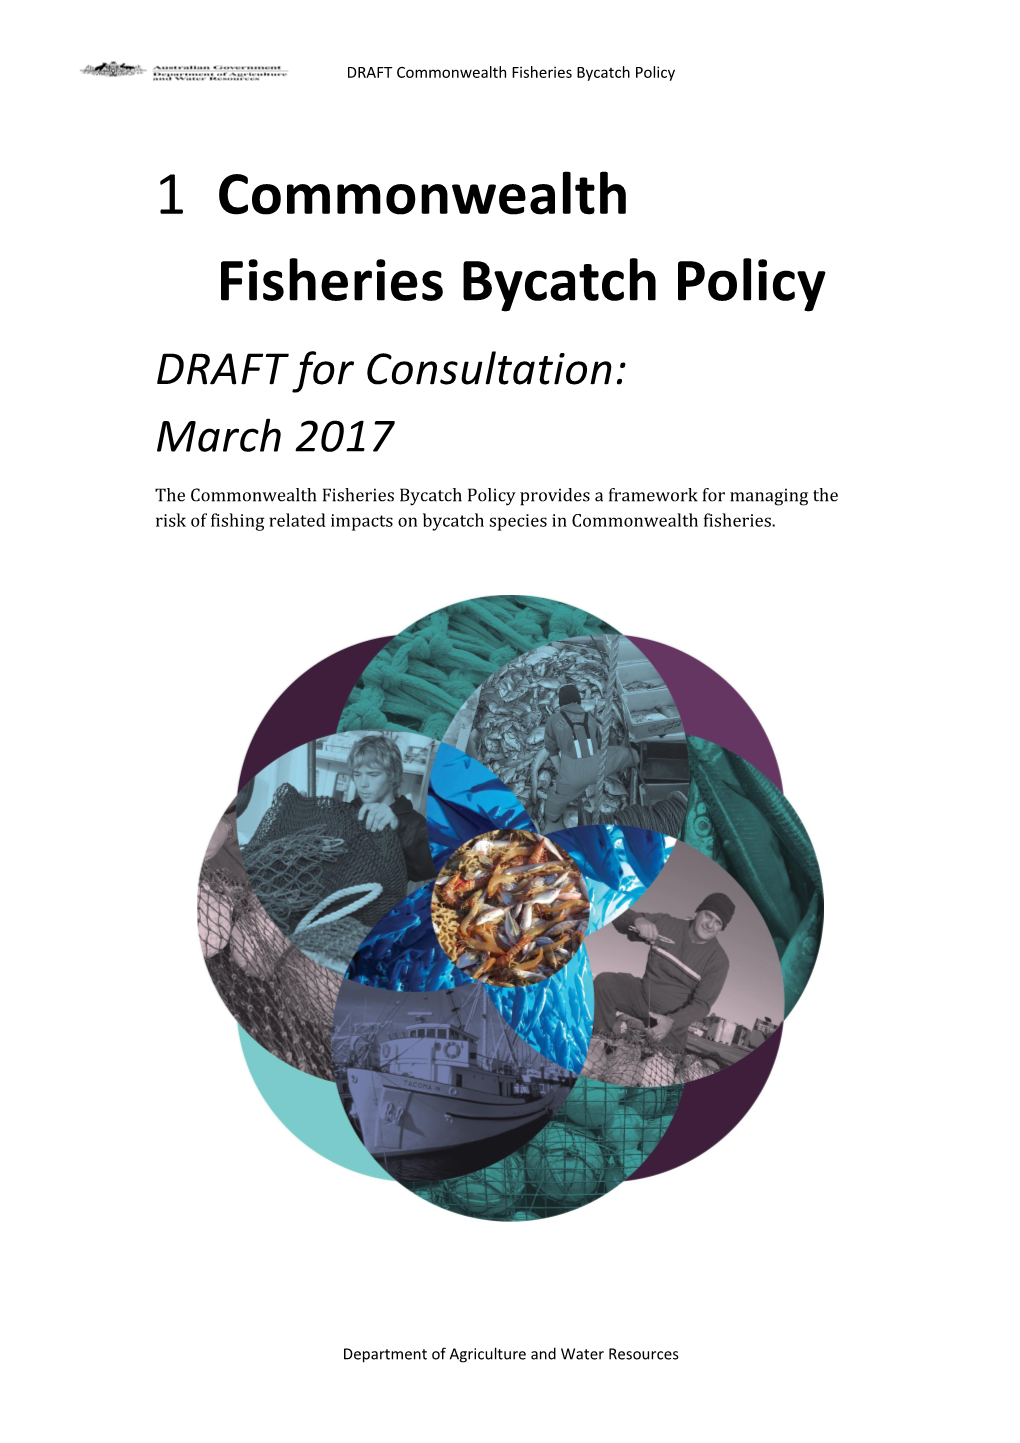 Commonwealth Fisheries Bycatch Policy